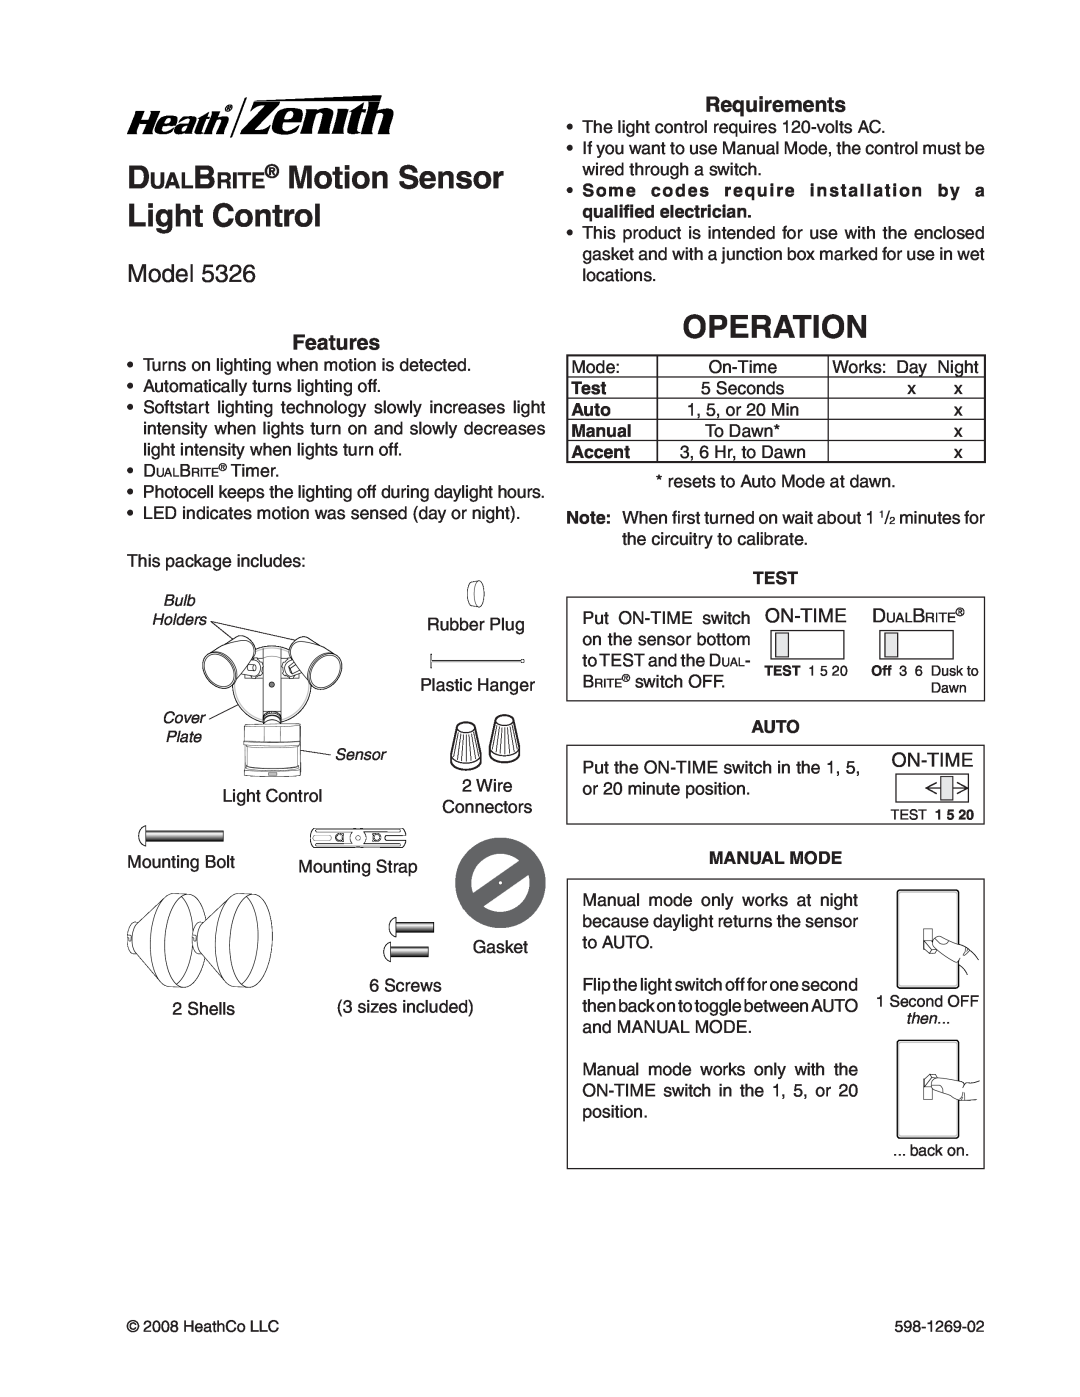 Heath Zenith 5326 manual DualBrite Motion Sensor Light Control, Operation, Model, Features, Requirements, On-Time, Test 